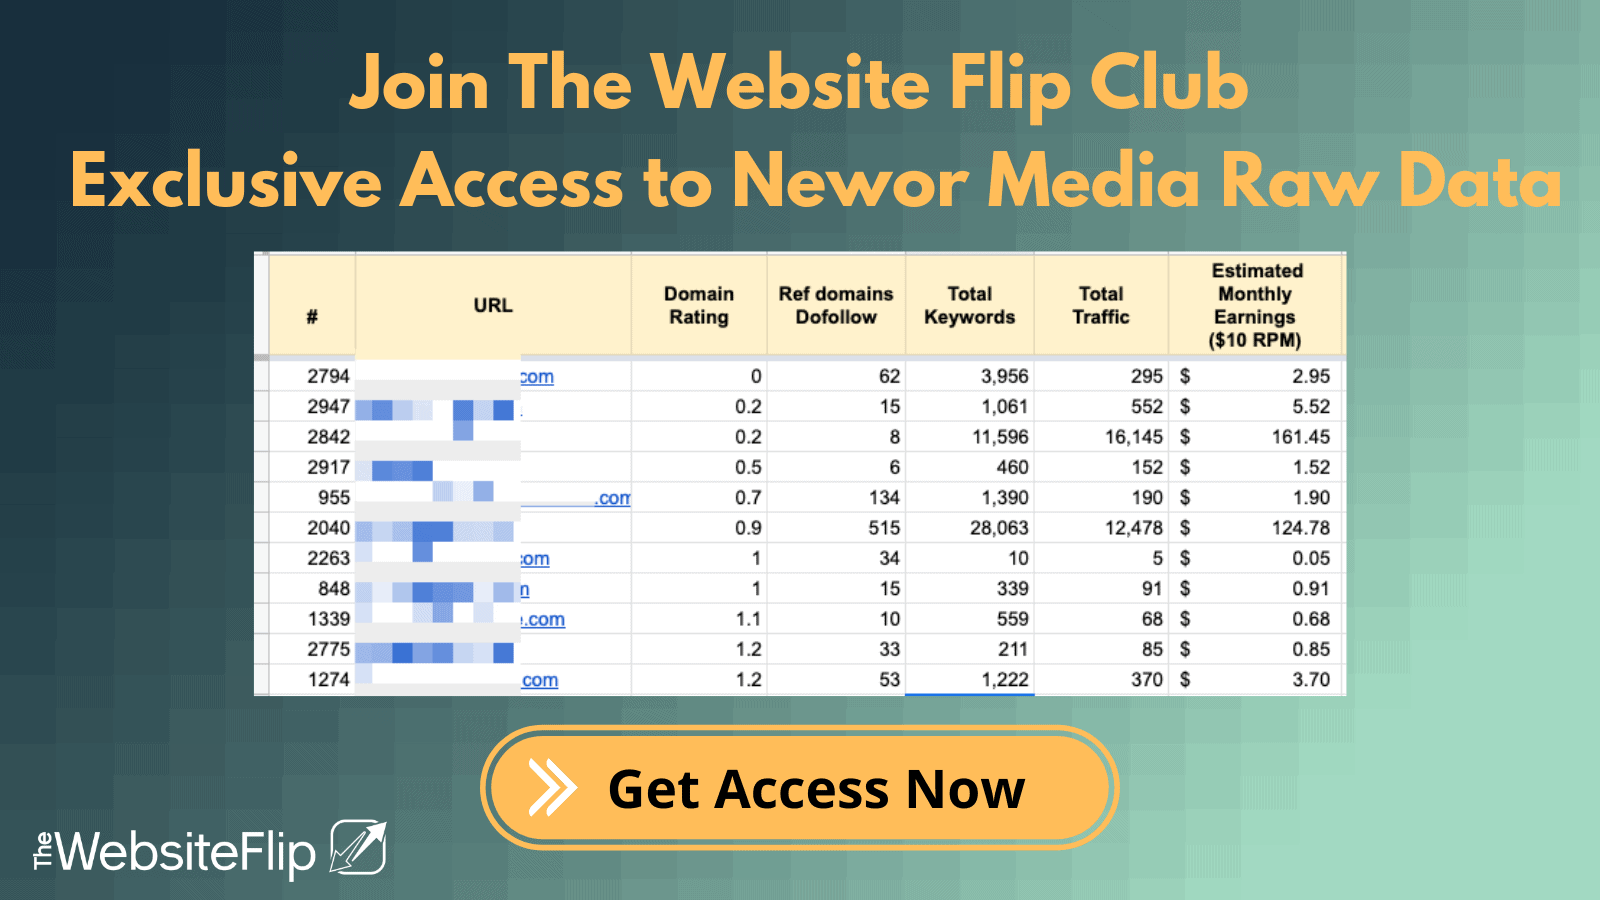 Exclusive Access to Newor Media Raw Data